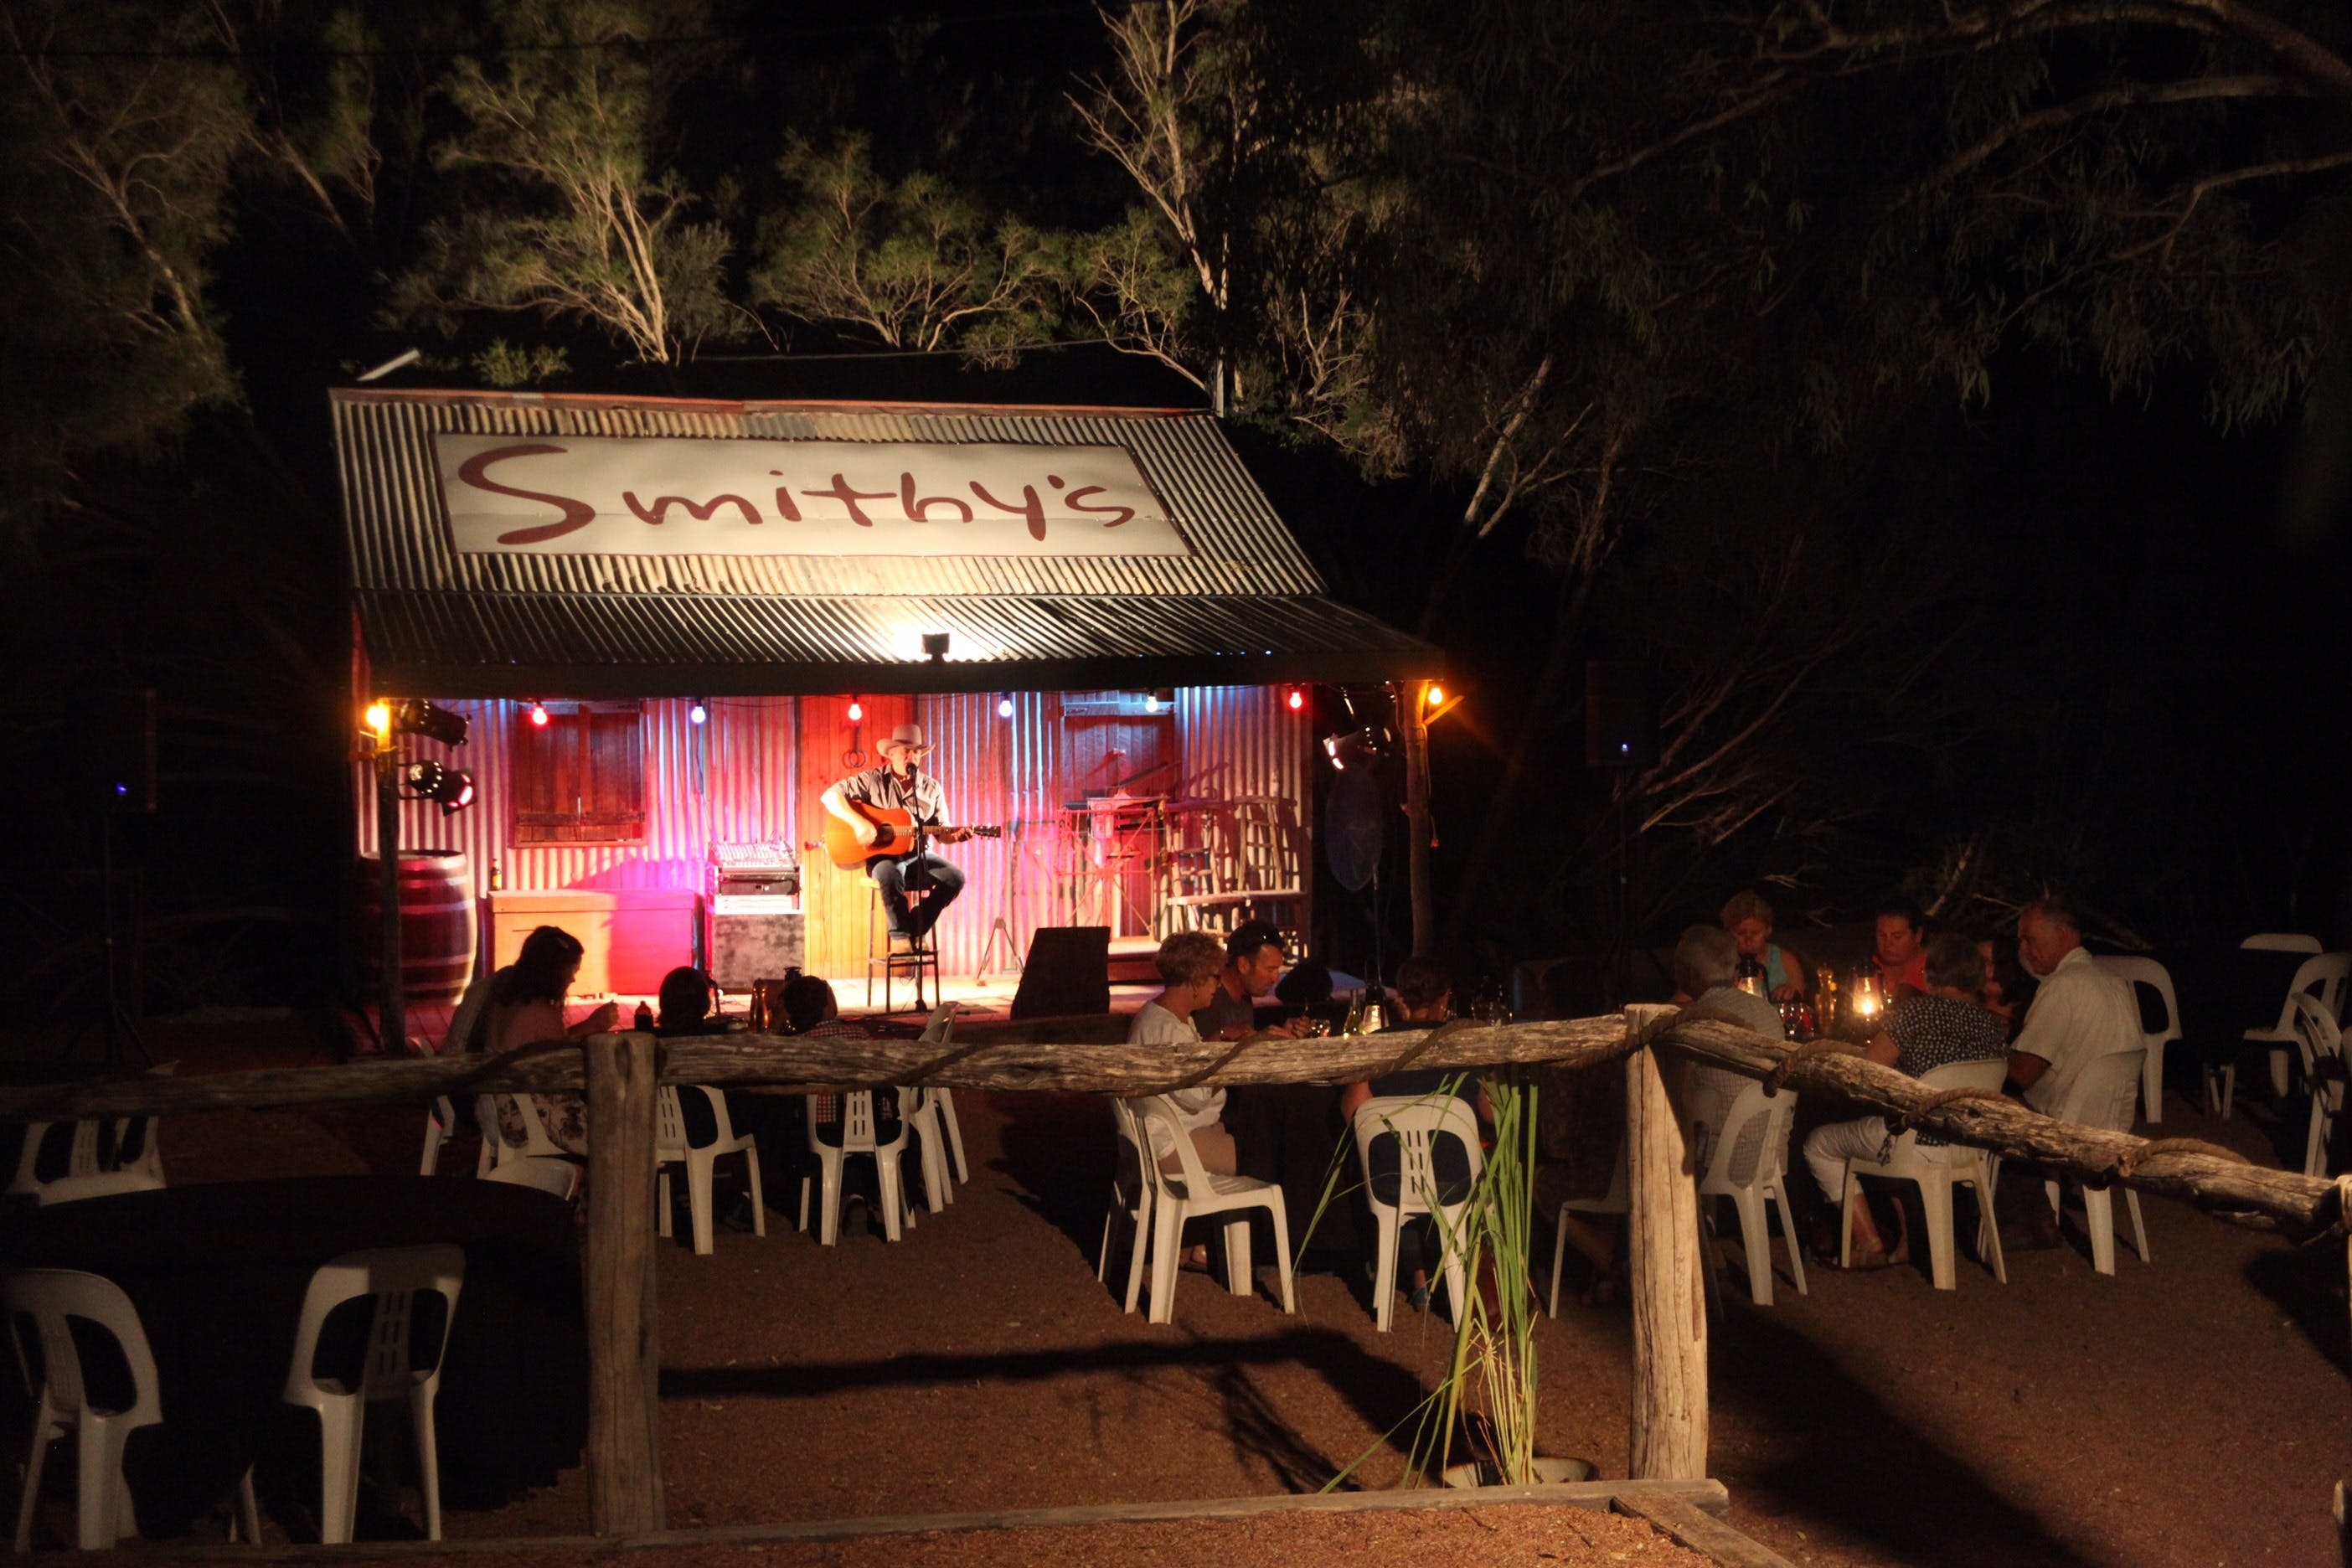 Smithy's Outback Dinner and Show - Accommodation Nelson Bay